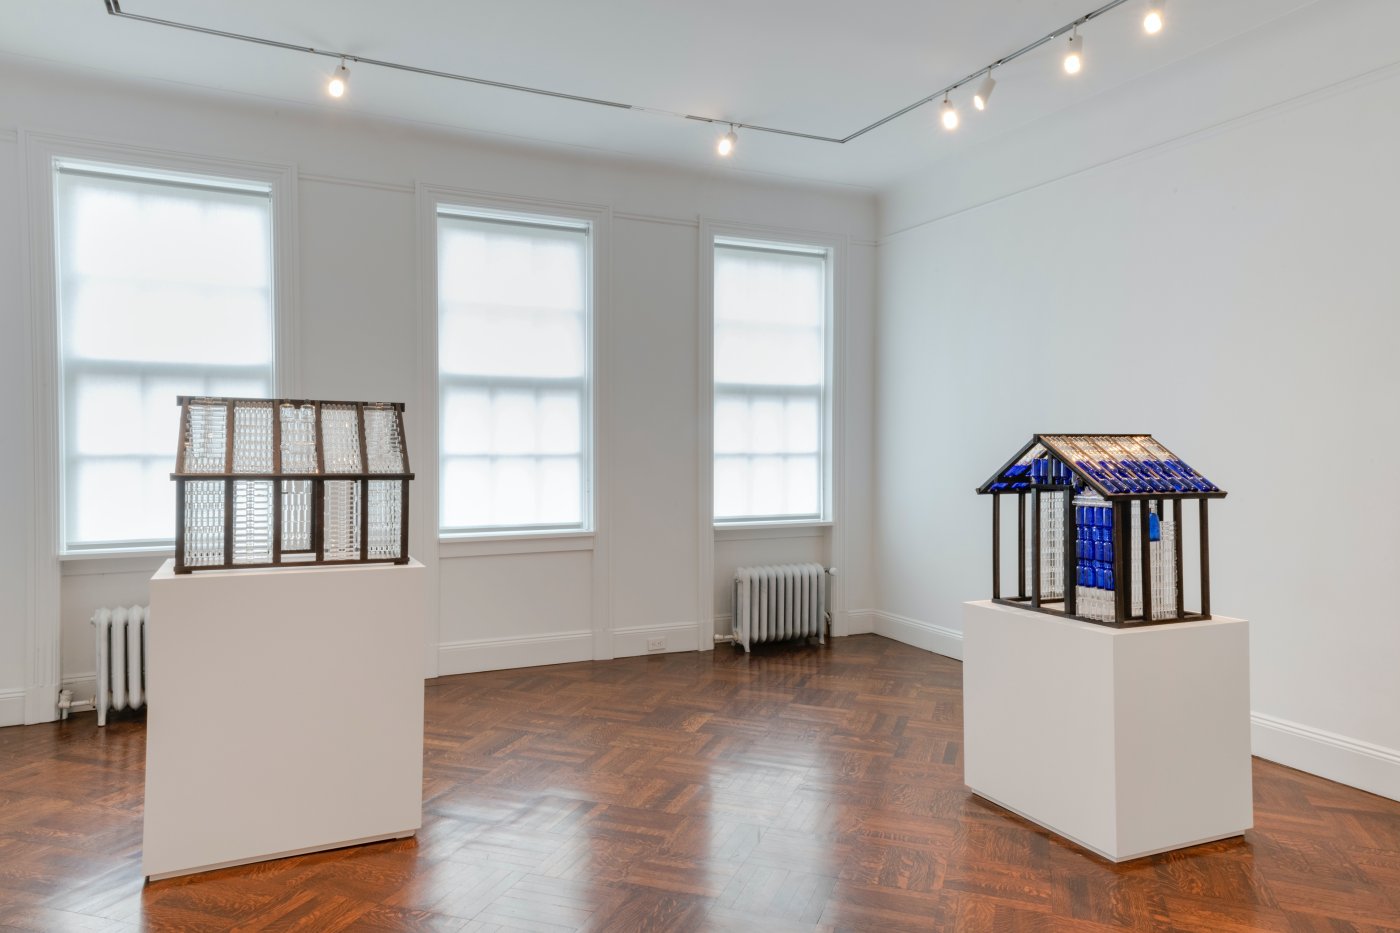 Installation image for Mildred Howard: A Sonata in Four Parts, at Franklin Parrasch Gallery